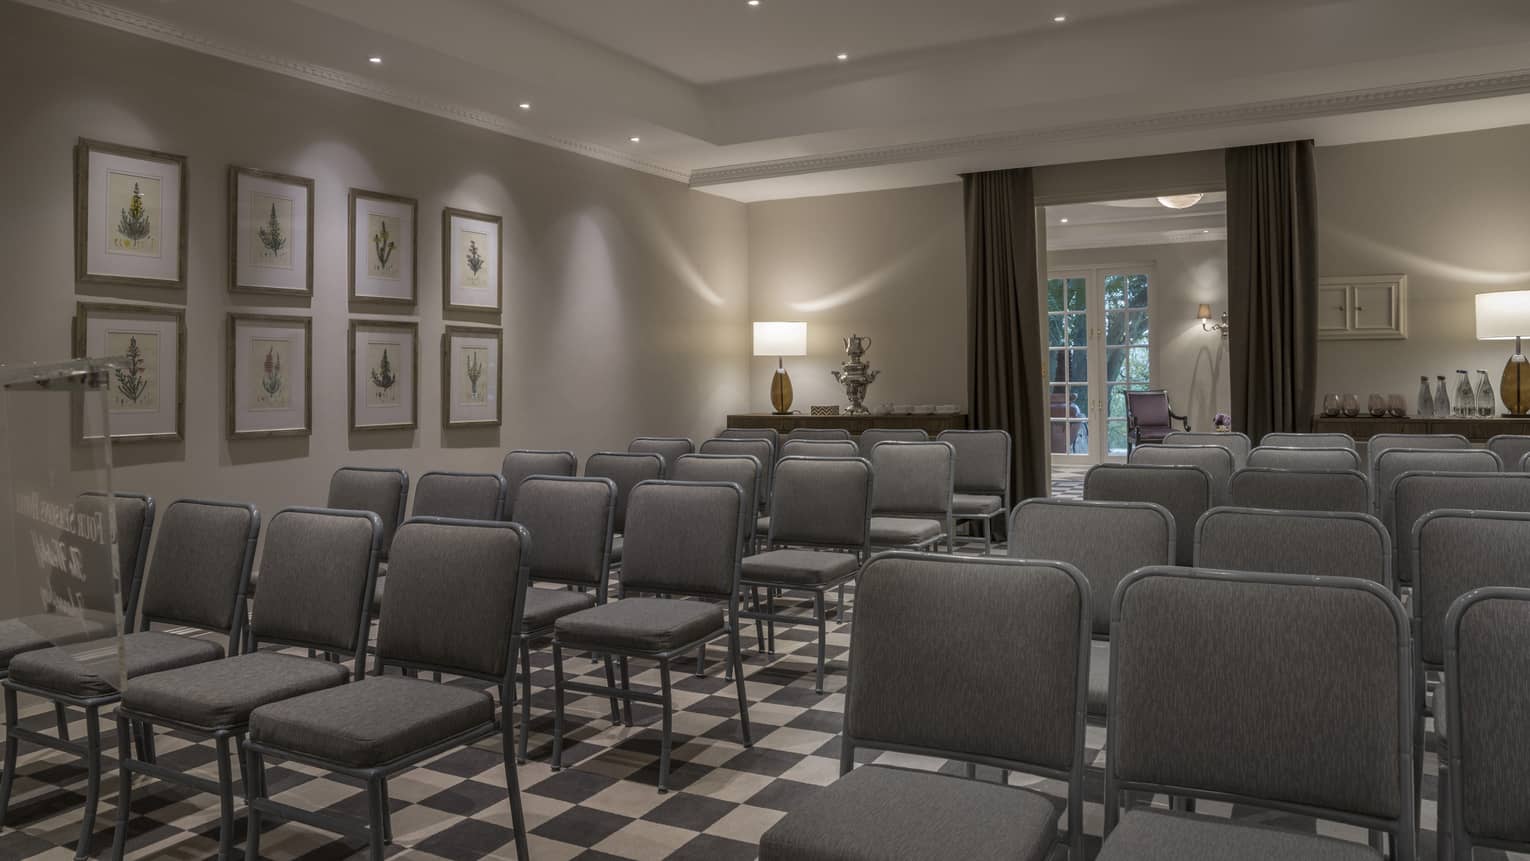 Strelitzia Meeting Room Theatre with rows of grey chairs 